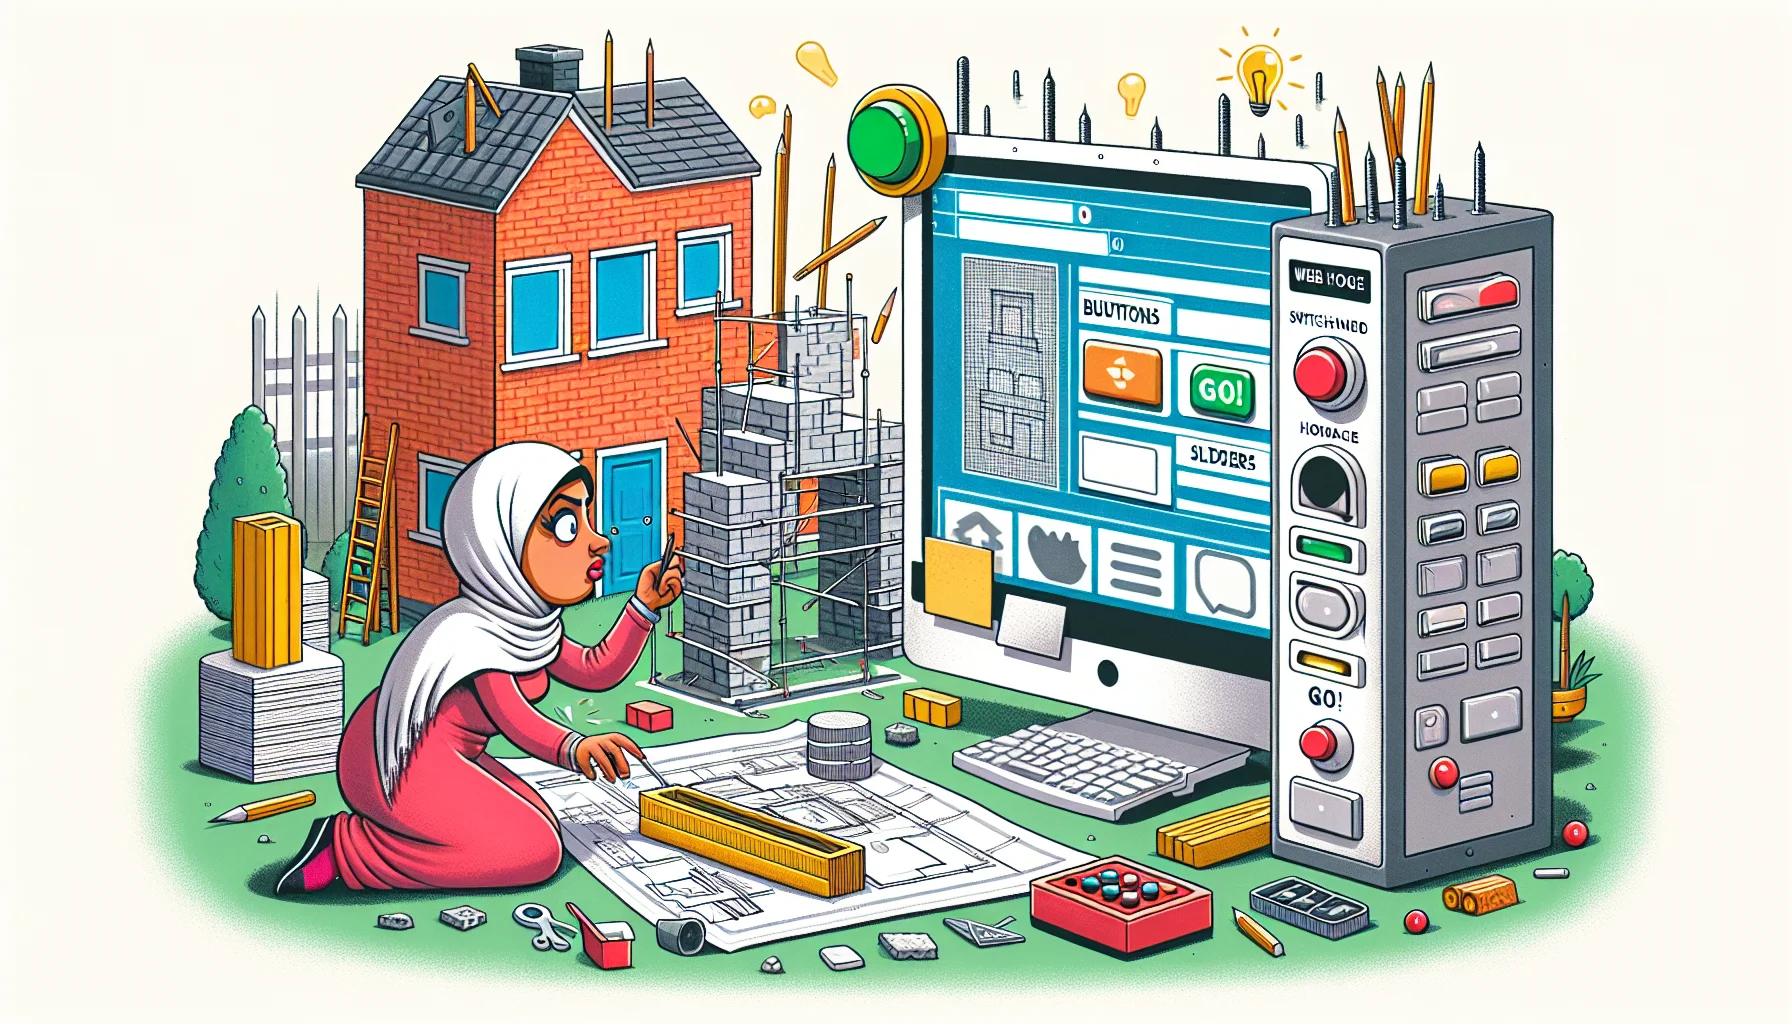 Create a humorous scene depicting a web page being built in the style of an architect constructing a building. The architect, a Middle-Eastern woman, is hard at work and focused on the blueprints. Around her are various building materials, but they all represent different web elements, such as buttons, sliders, and images, instead of bricks and mortar. A comically large, symbolic switchboard has a label saying 'web hosting' and the architect is about to press a massive, enticing green 'GO' button to bring the webpage to life.